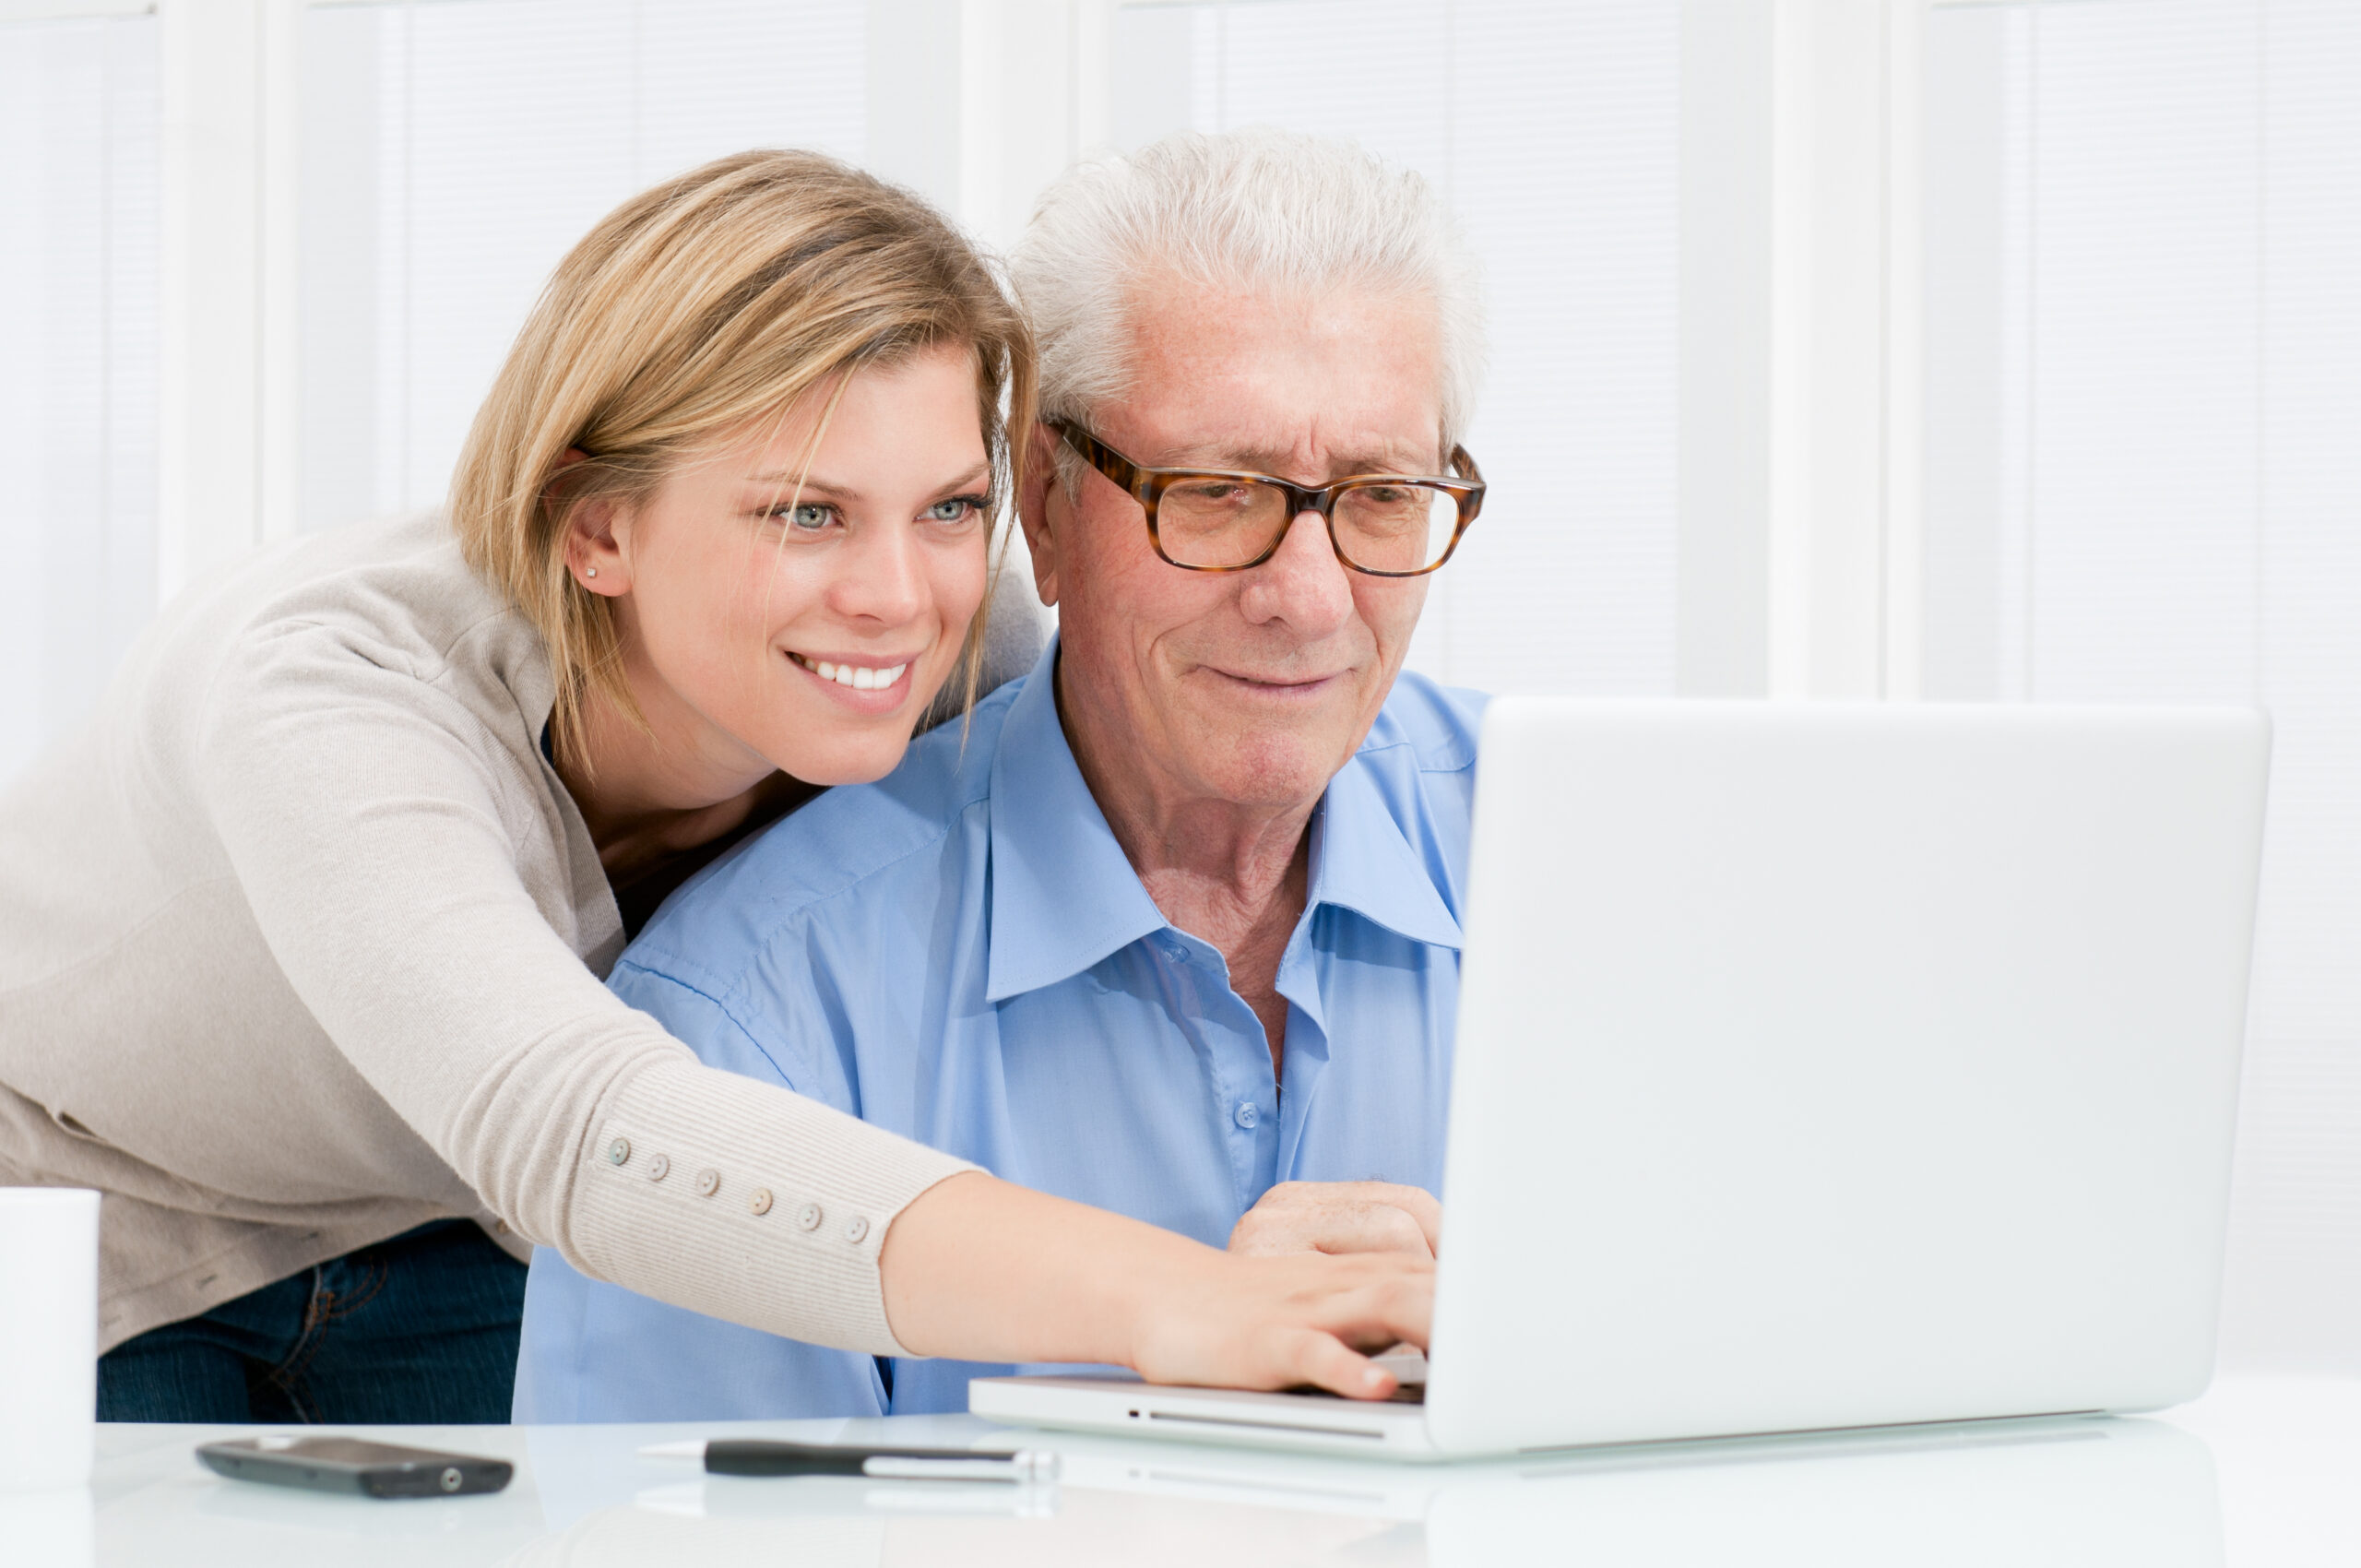 woman helps elderly man with computer